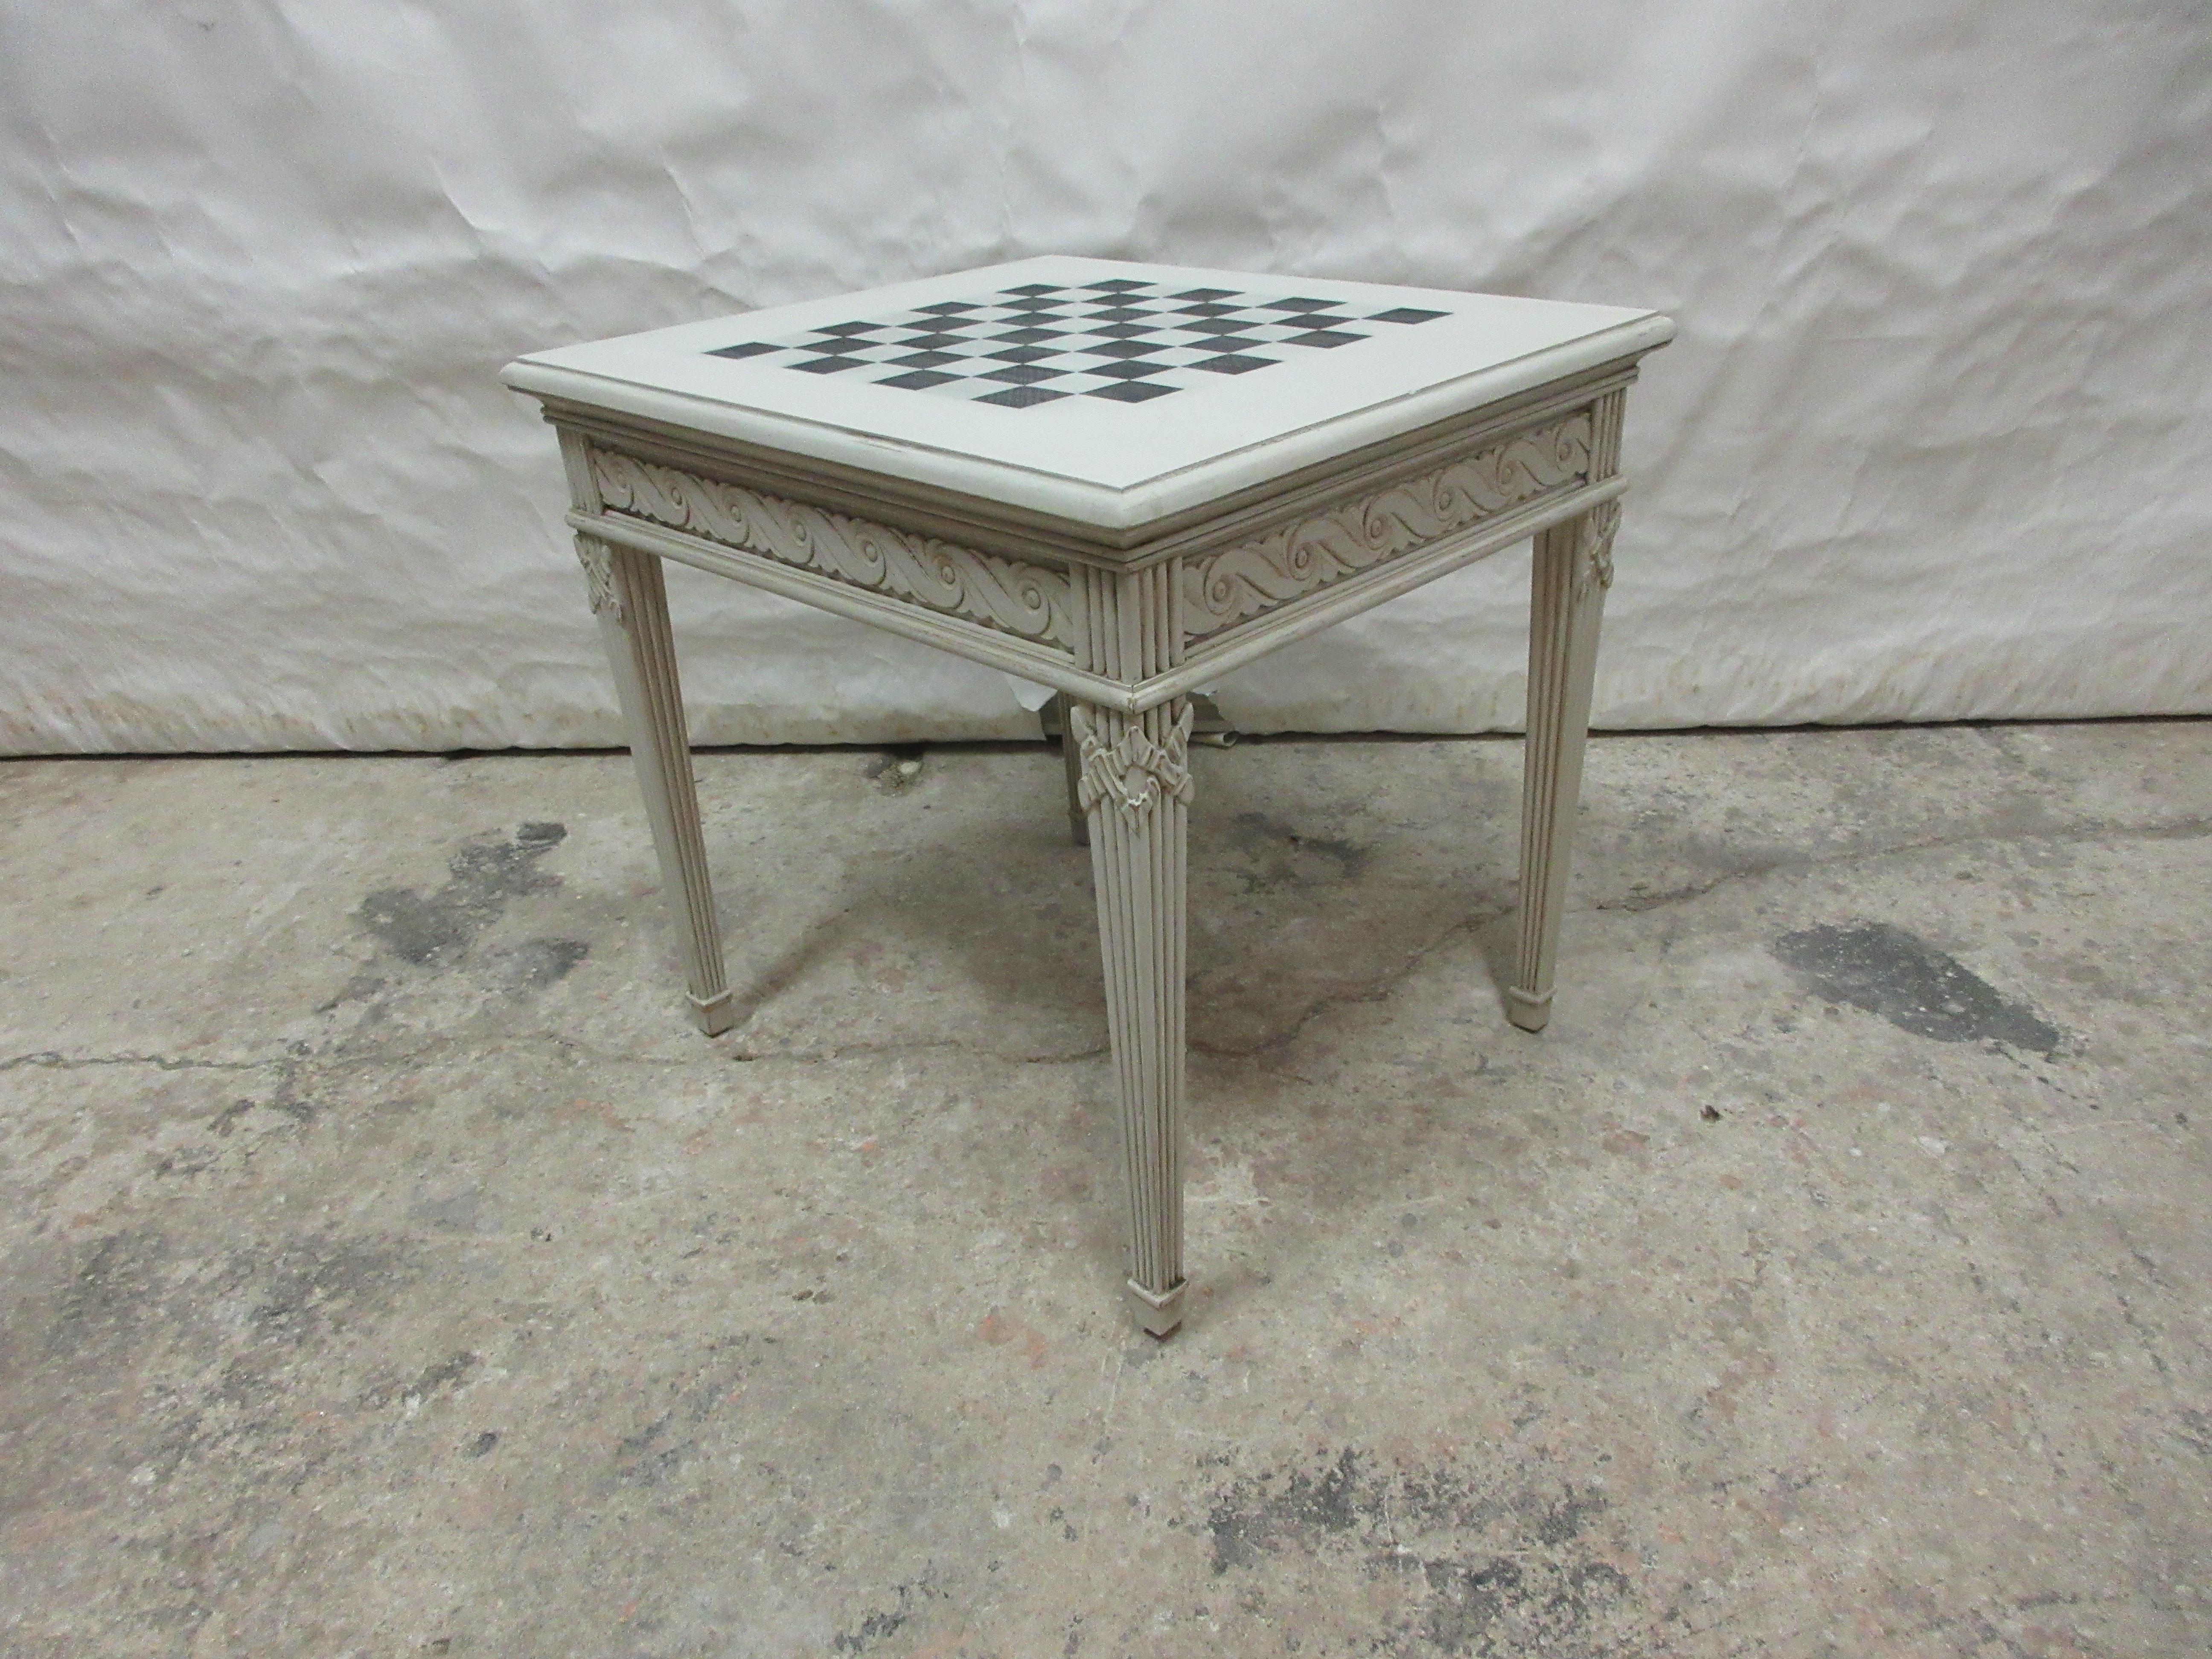 This is a unique Swedish Gustavian style chess table, its been restored and repainted in Milk Paint.